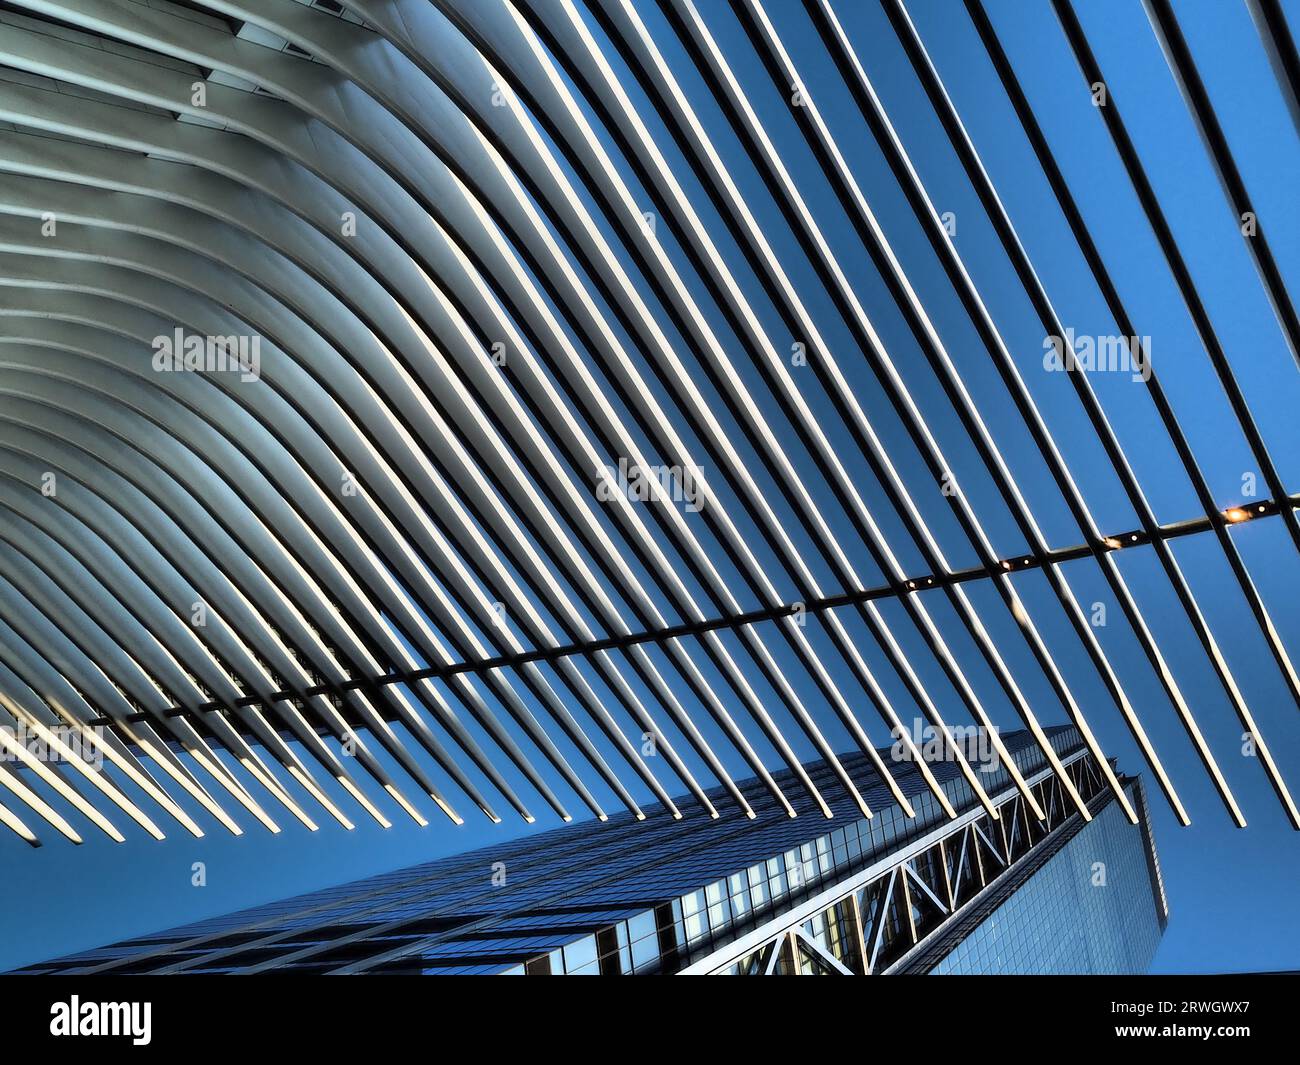 View of the Oculus, the transportation and shopping hub in downtown Manhattan. Stock Photo